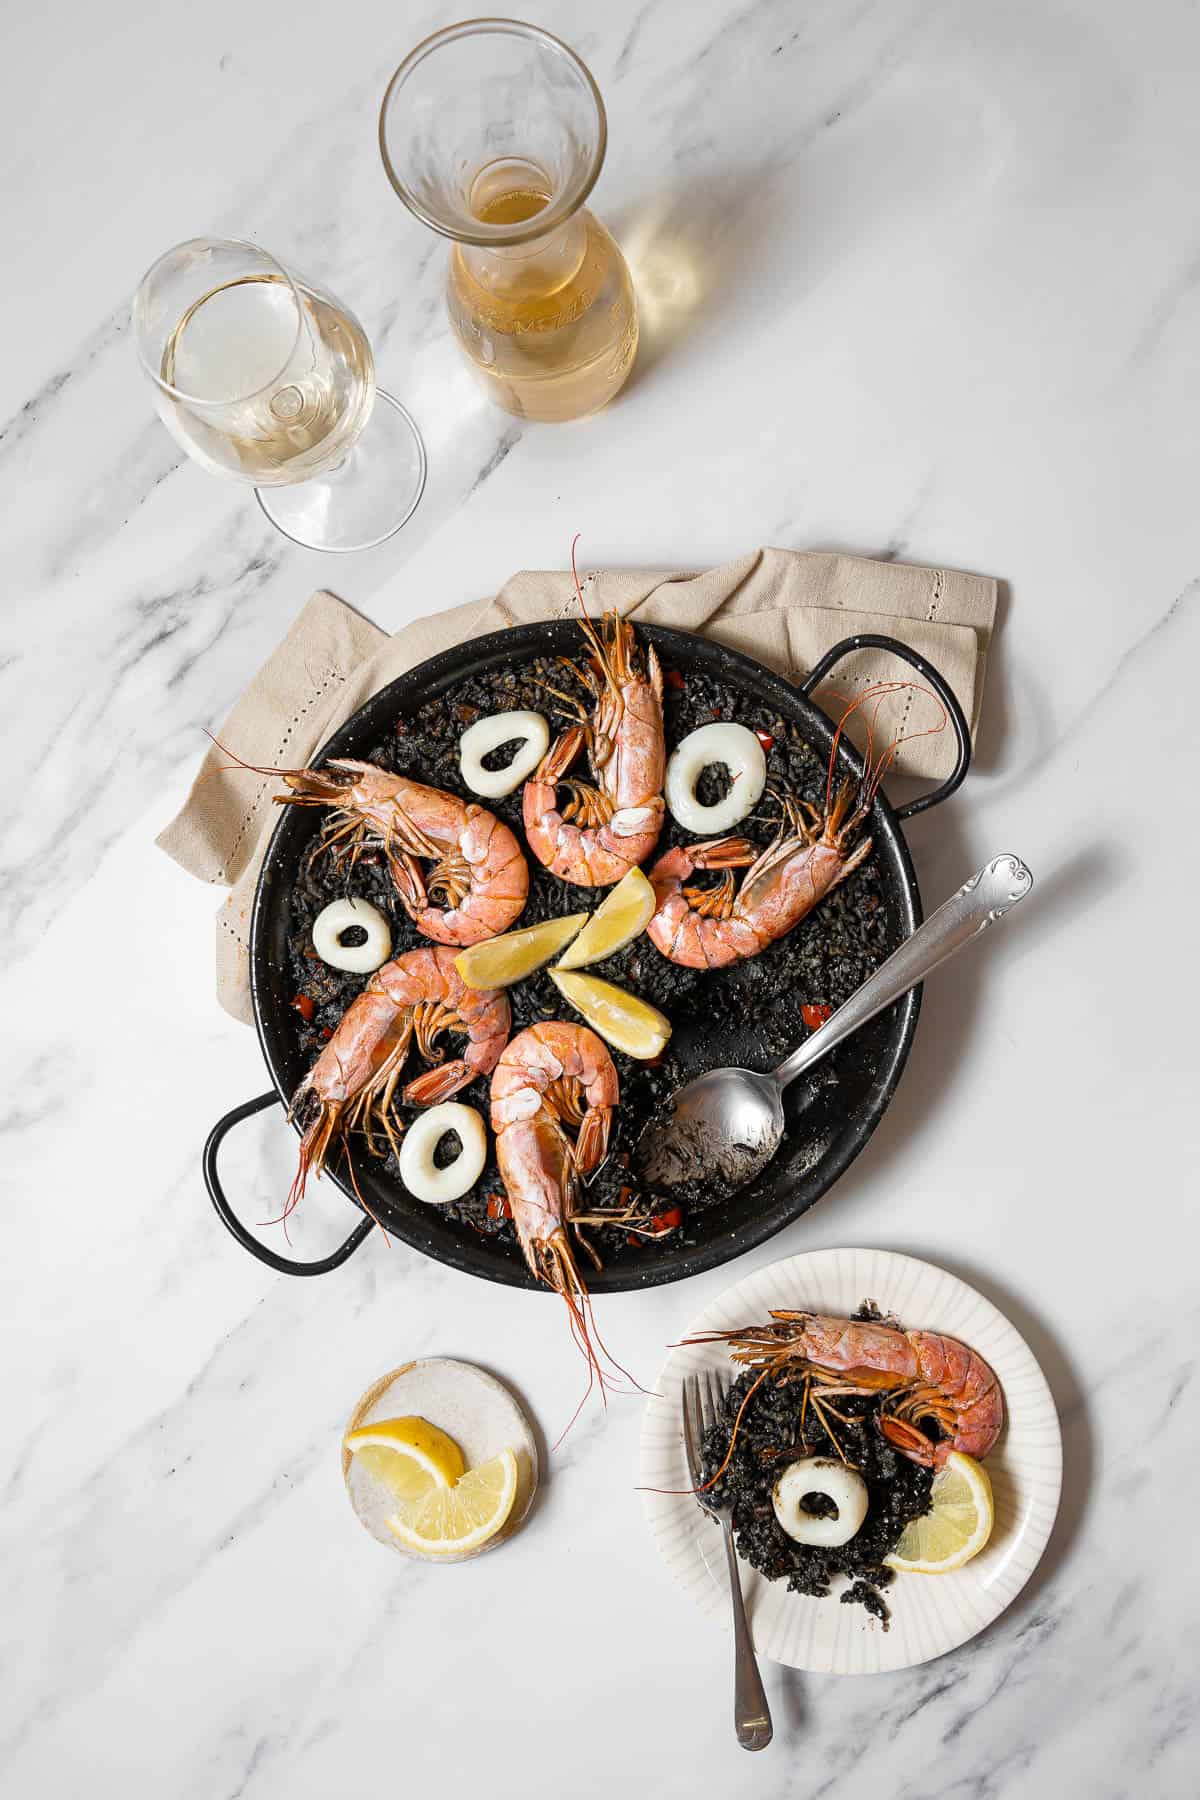 serving the black paella on a white plate.